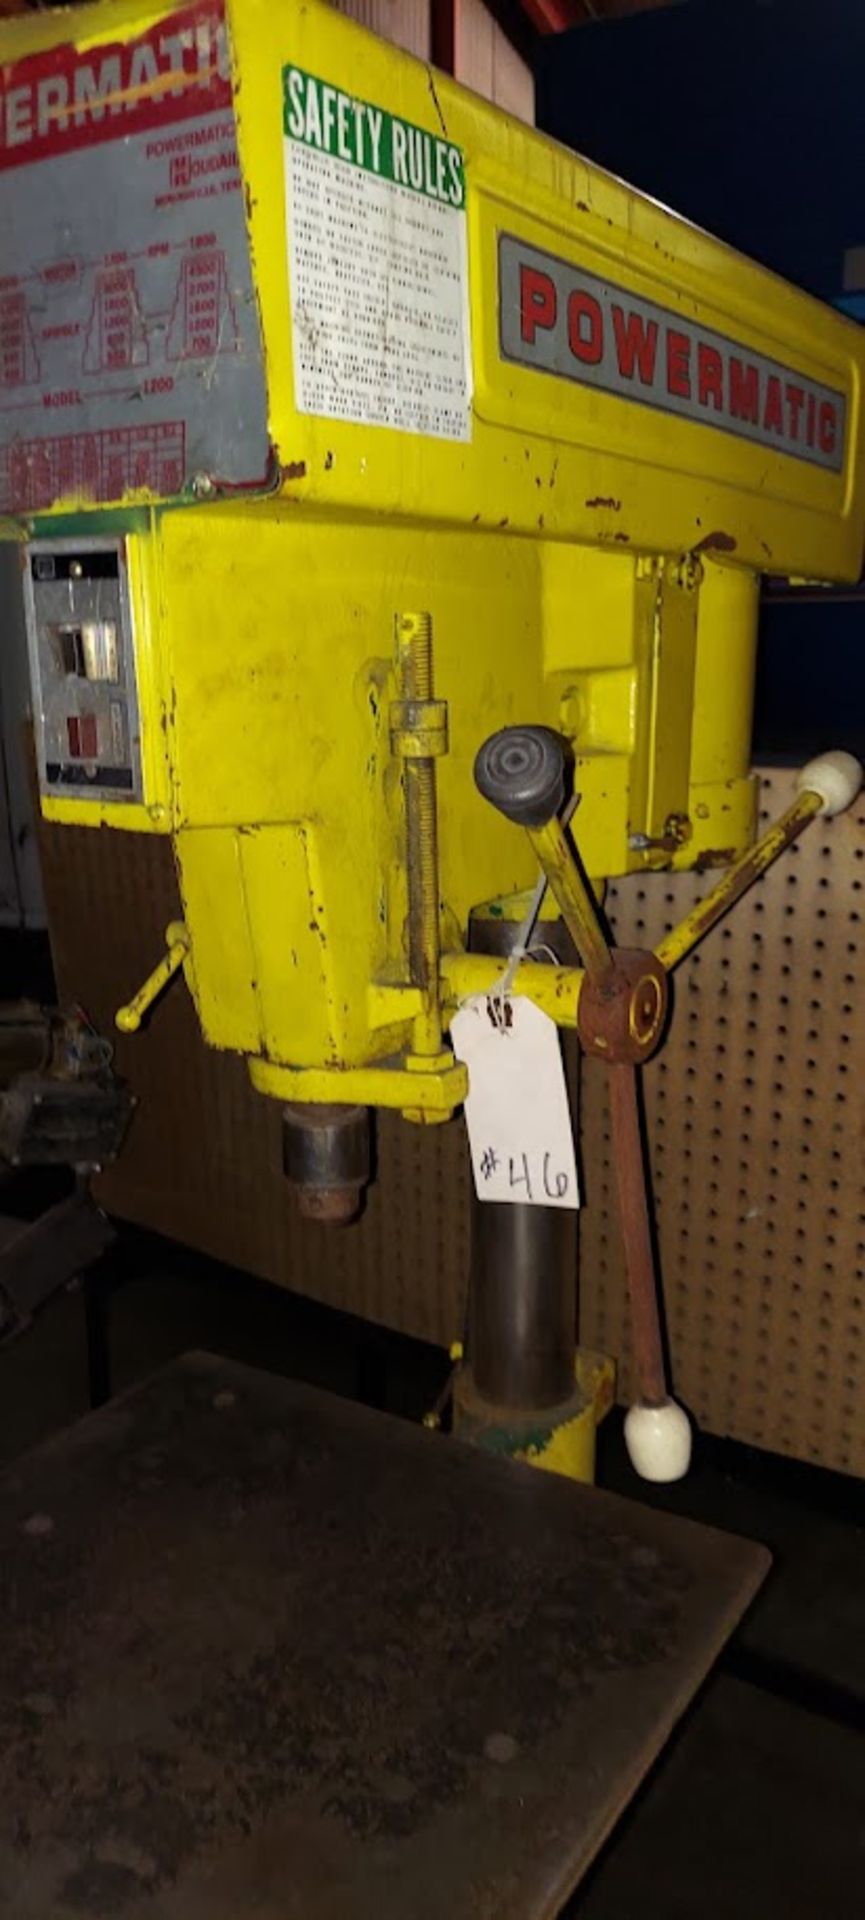 Powermatic 15" Drill Press, Model #115A, Variable Speed Step Pulley, Motor is 3/4 HP 115/208-230 - Image 2 of 3